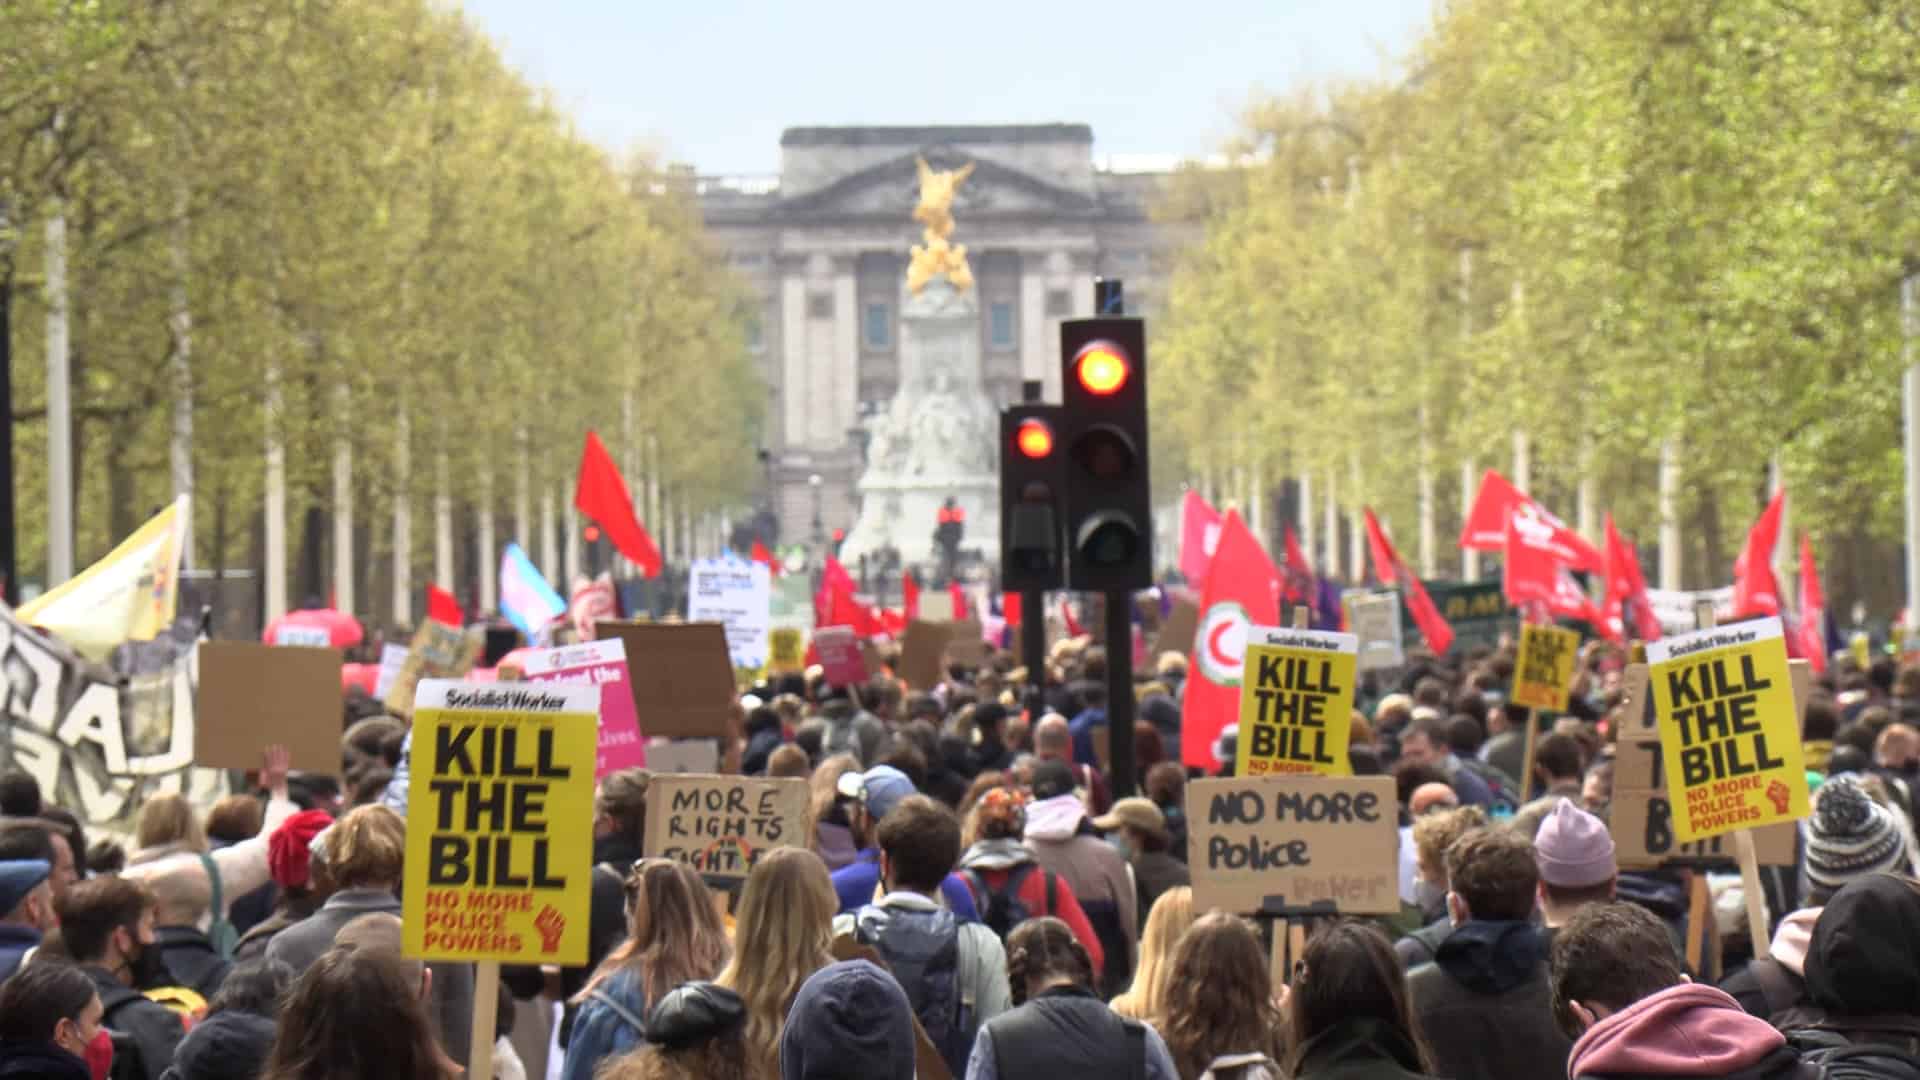 Watch- May Day protesters gather in London for biggest Kill the Bill protest so far